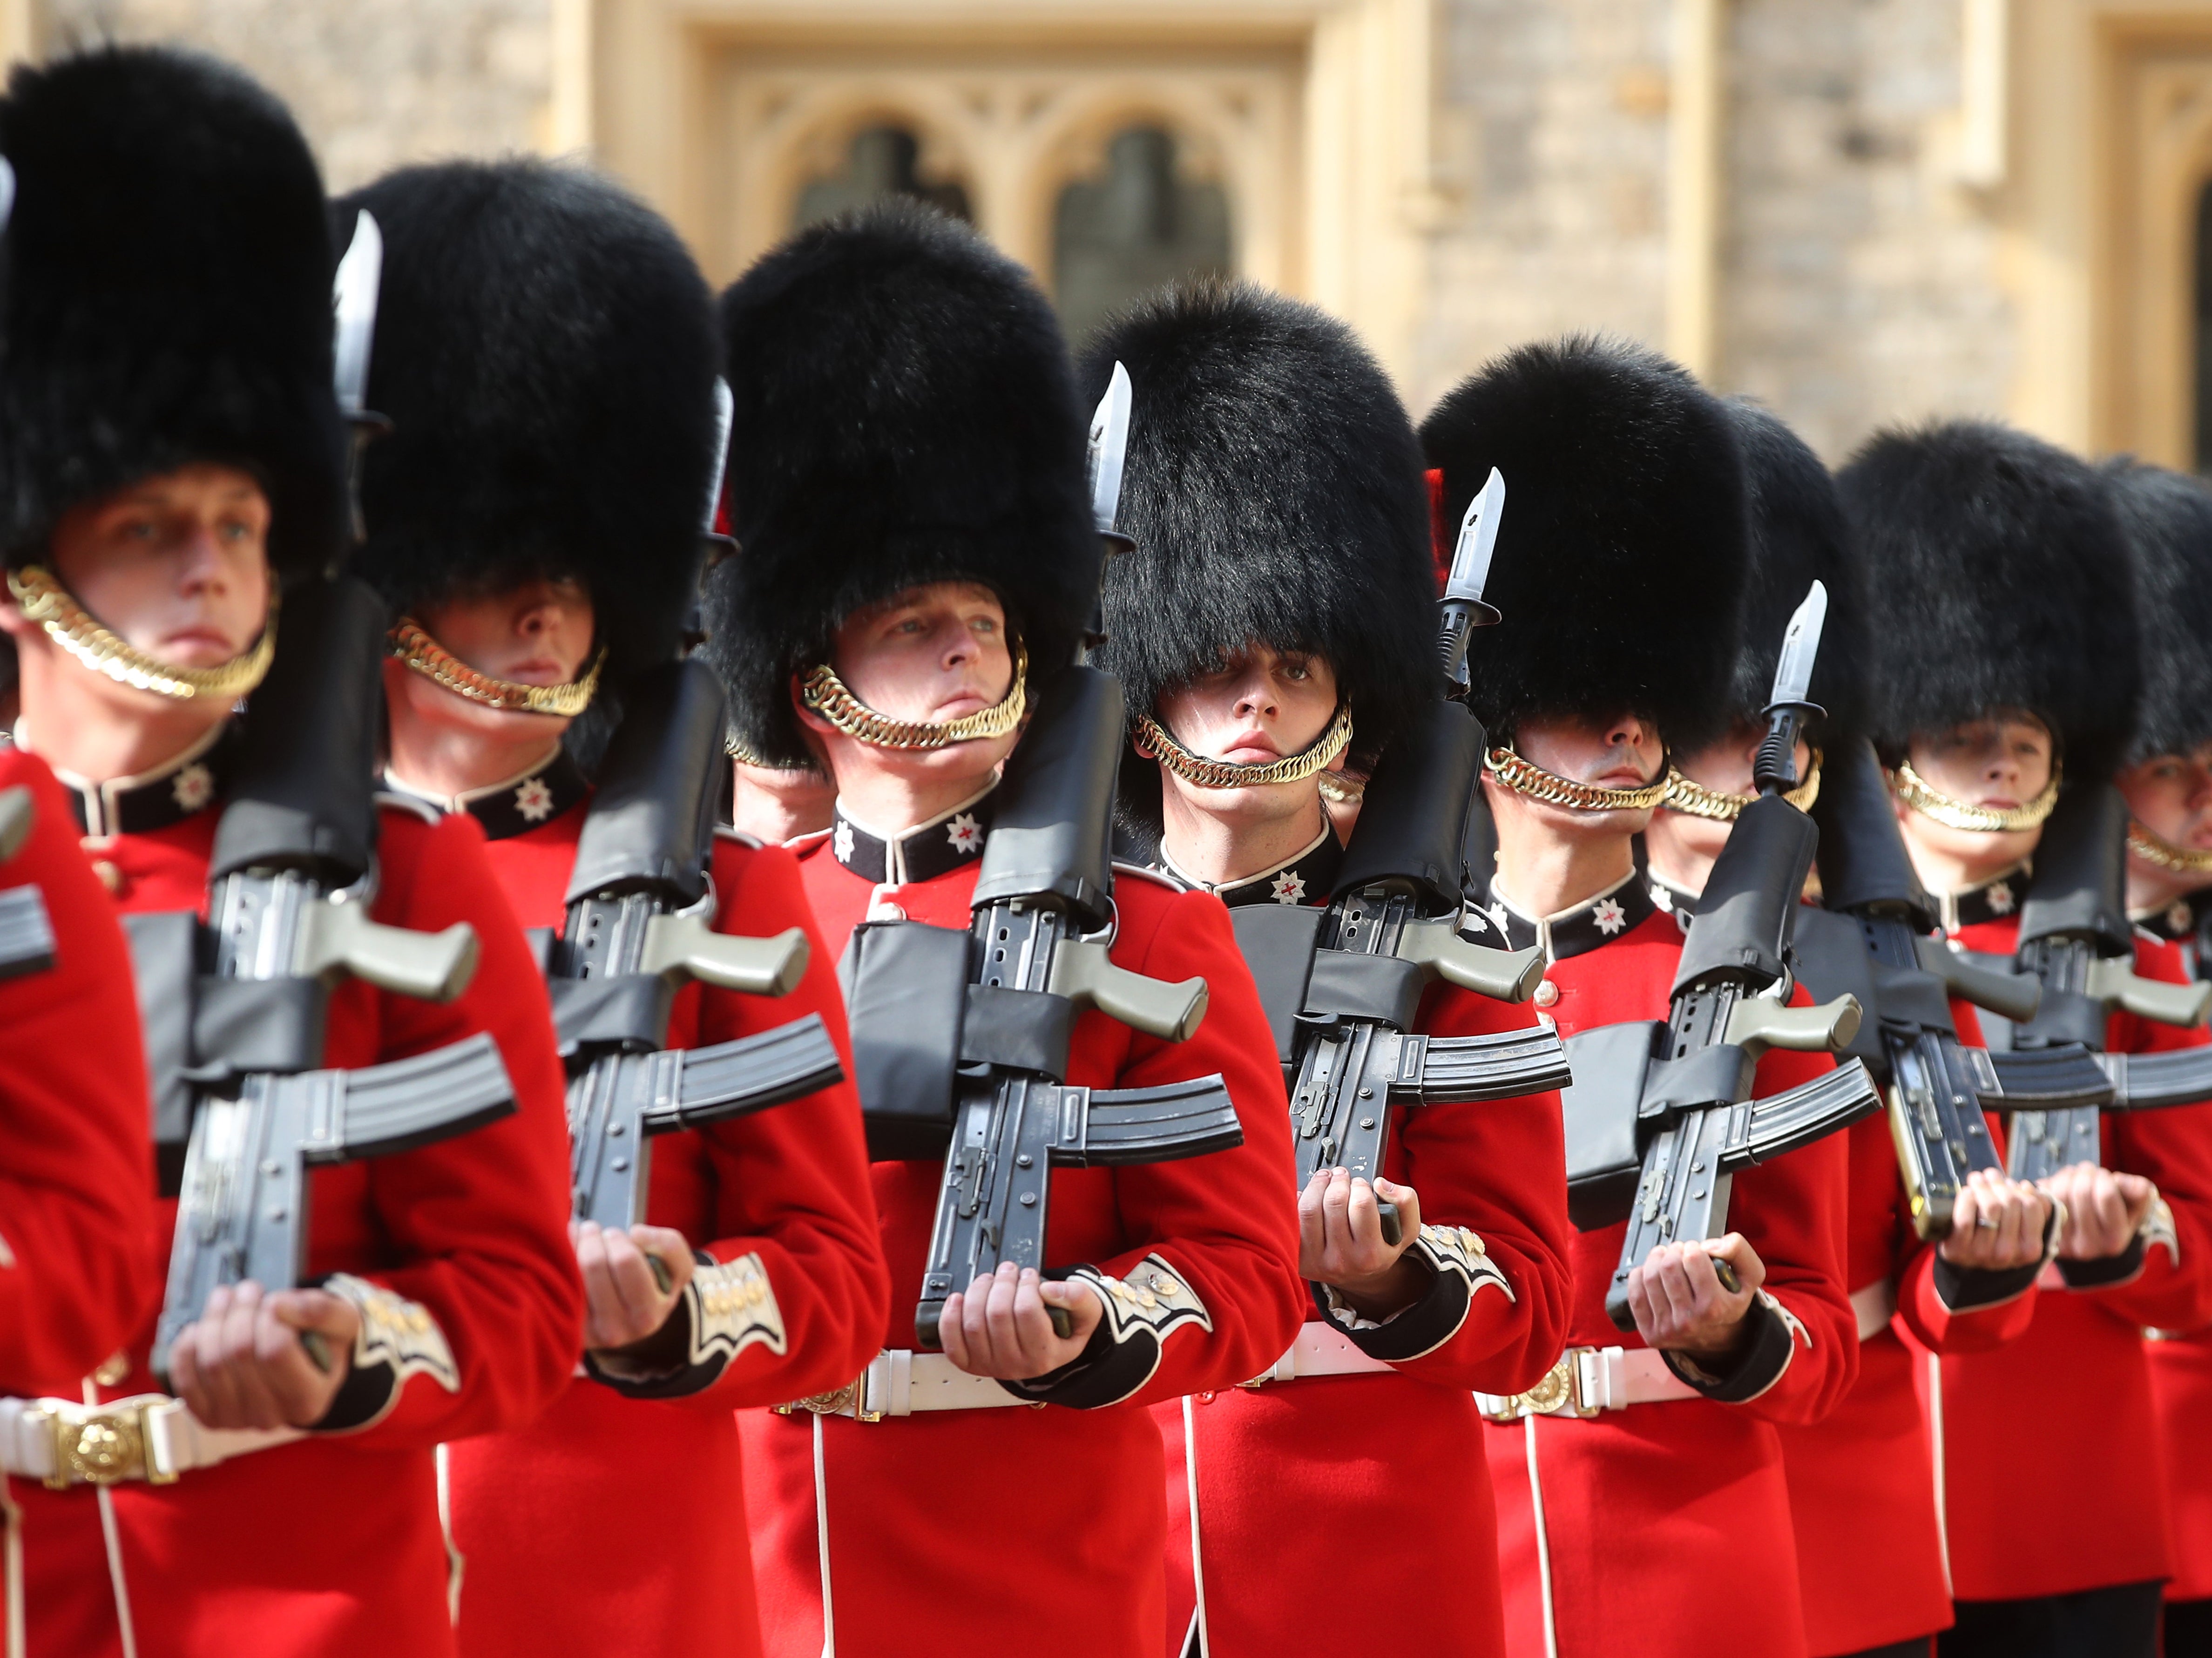 Soldiers from the Coldstream Guards at ceremonial display at Windsor Castle